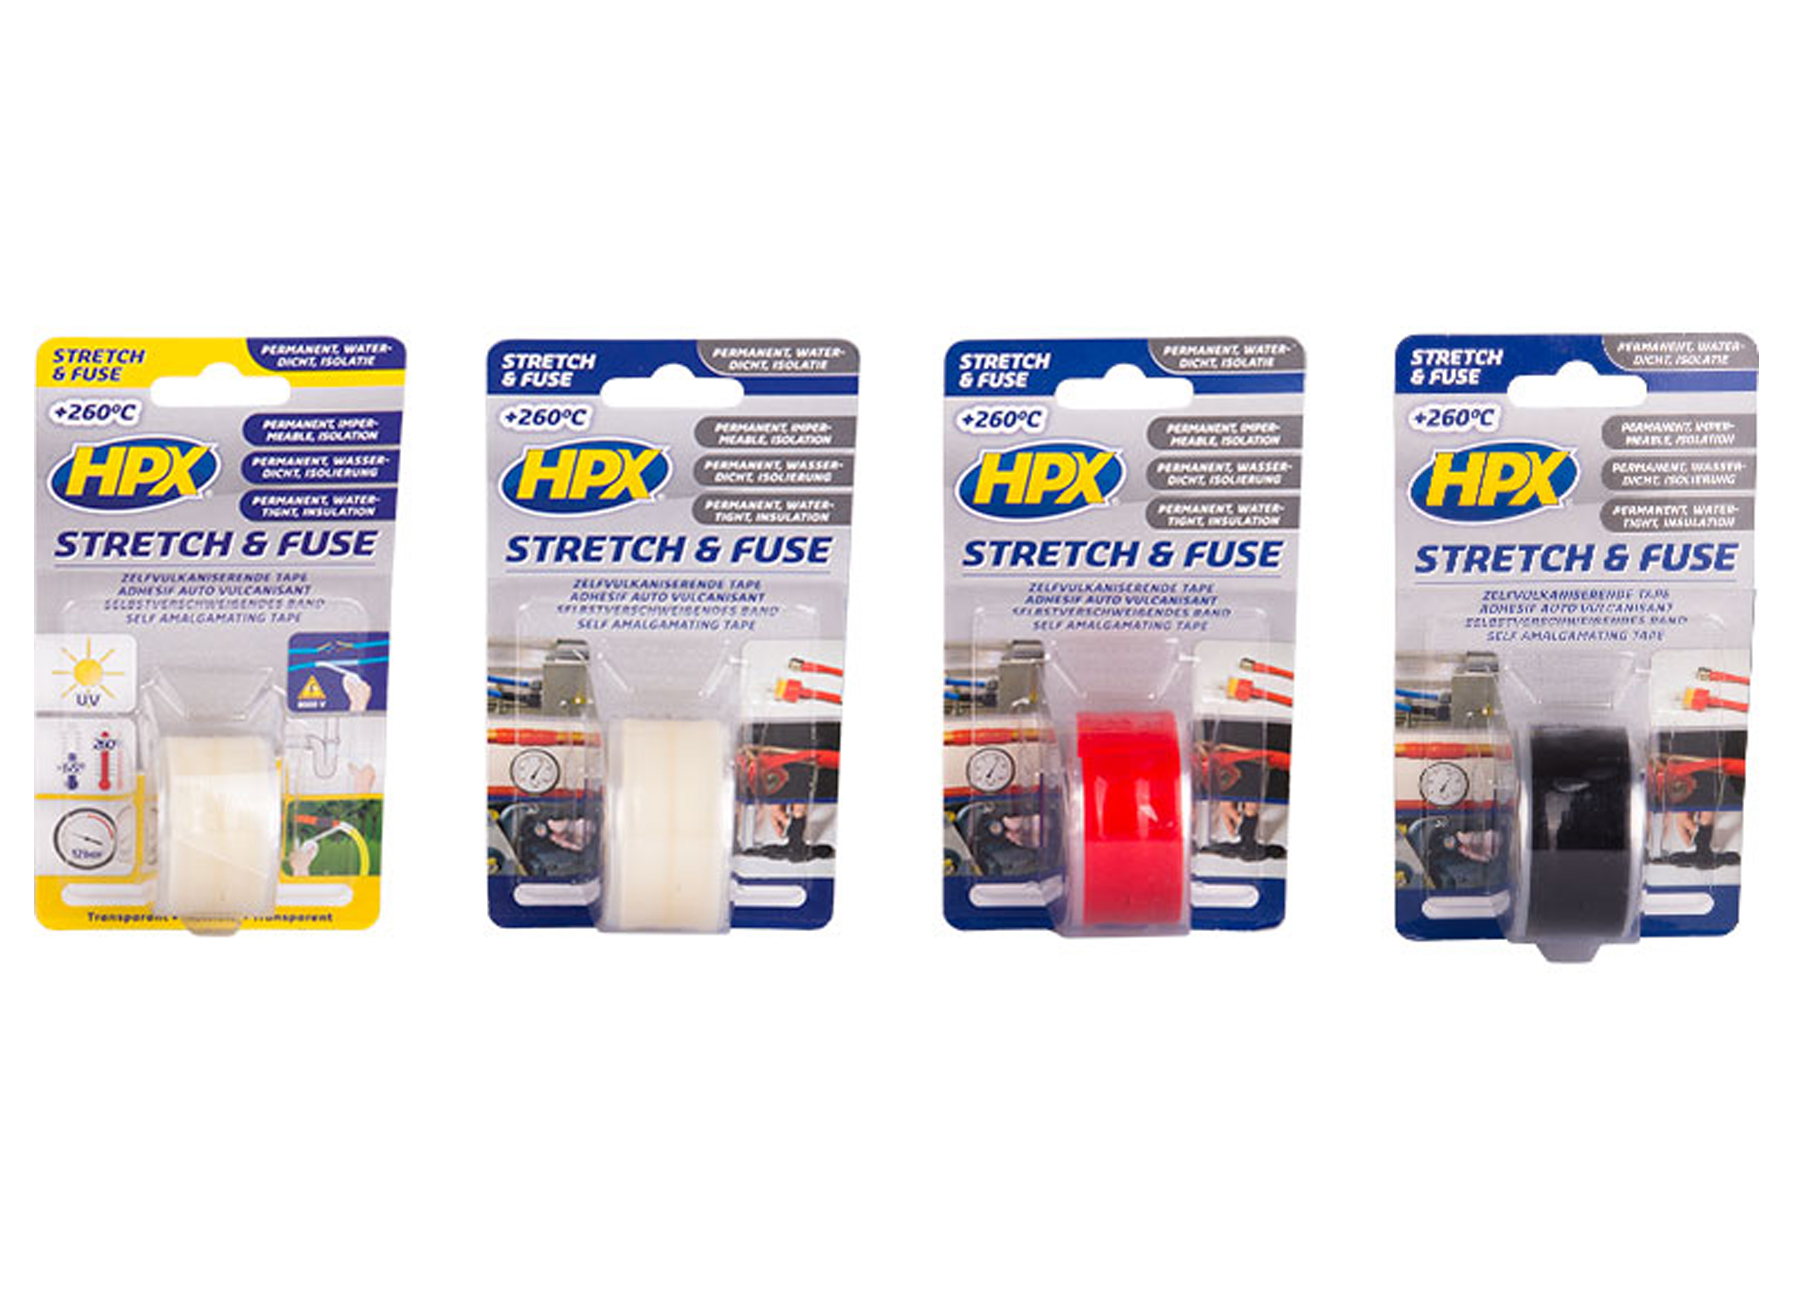 HPX STRETCH & FUSE RUBAN ISOLATION ET REPARATION